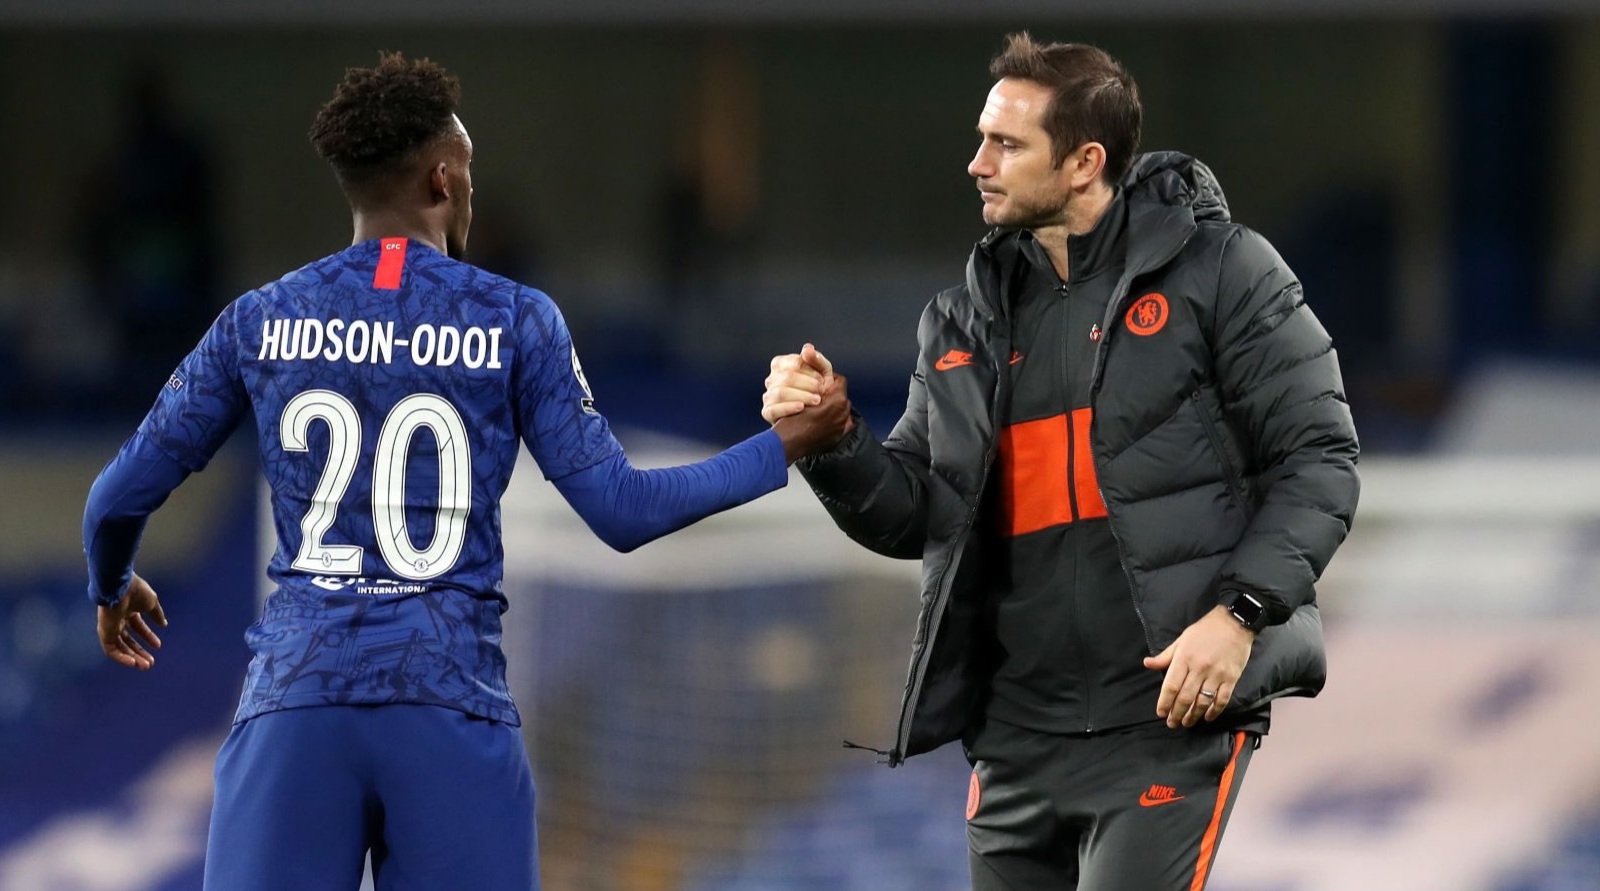 Frank Lampard reacts to Hudson-Odoi’s Chelsea title claim